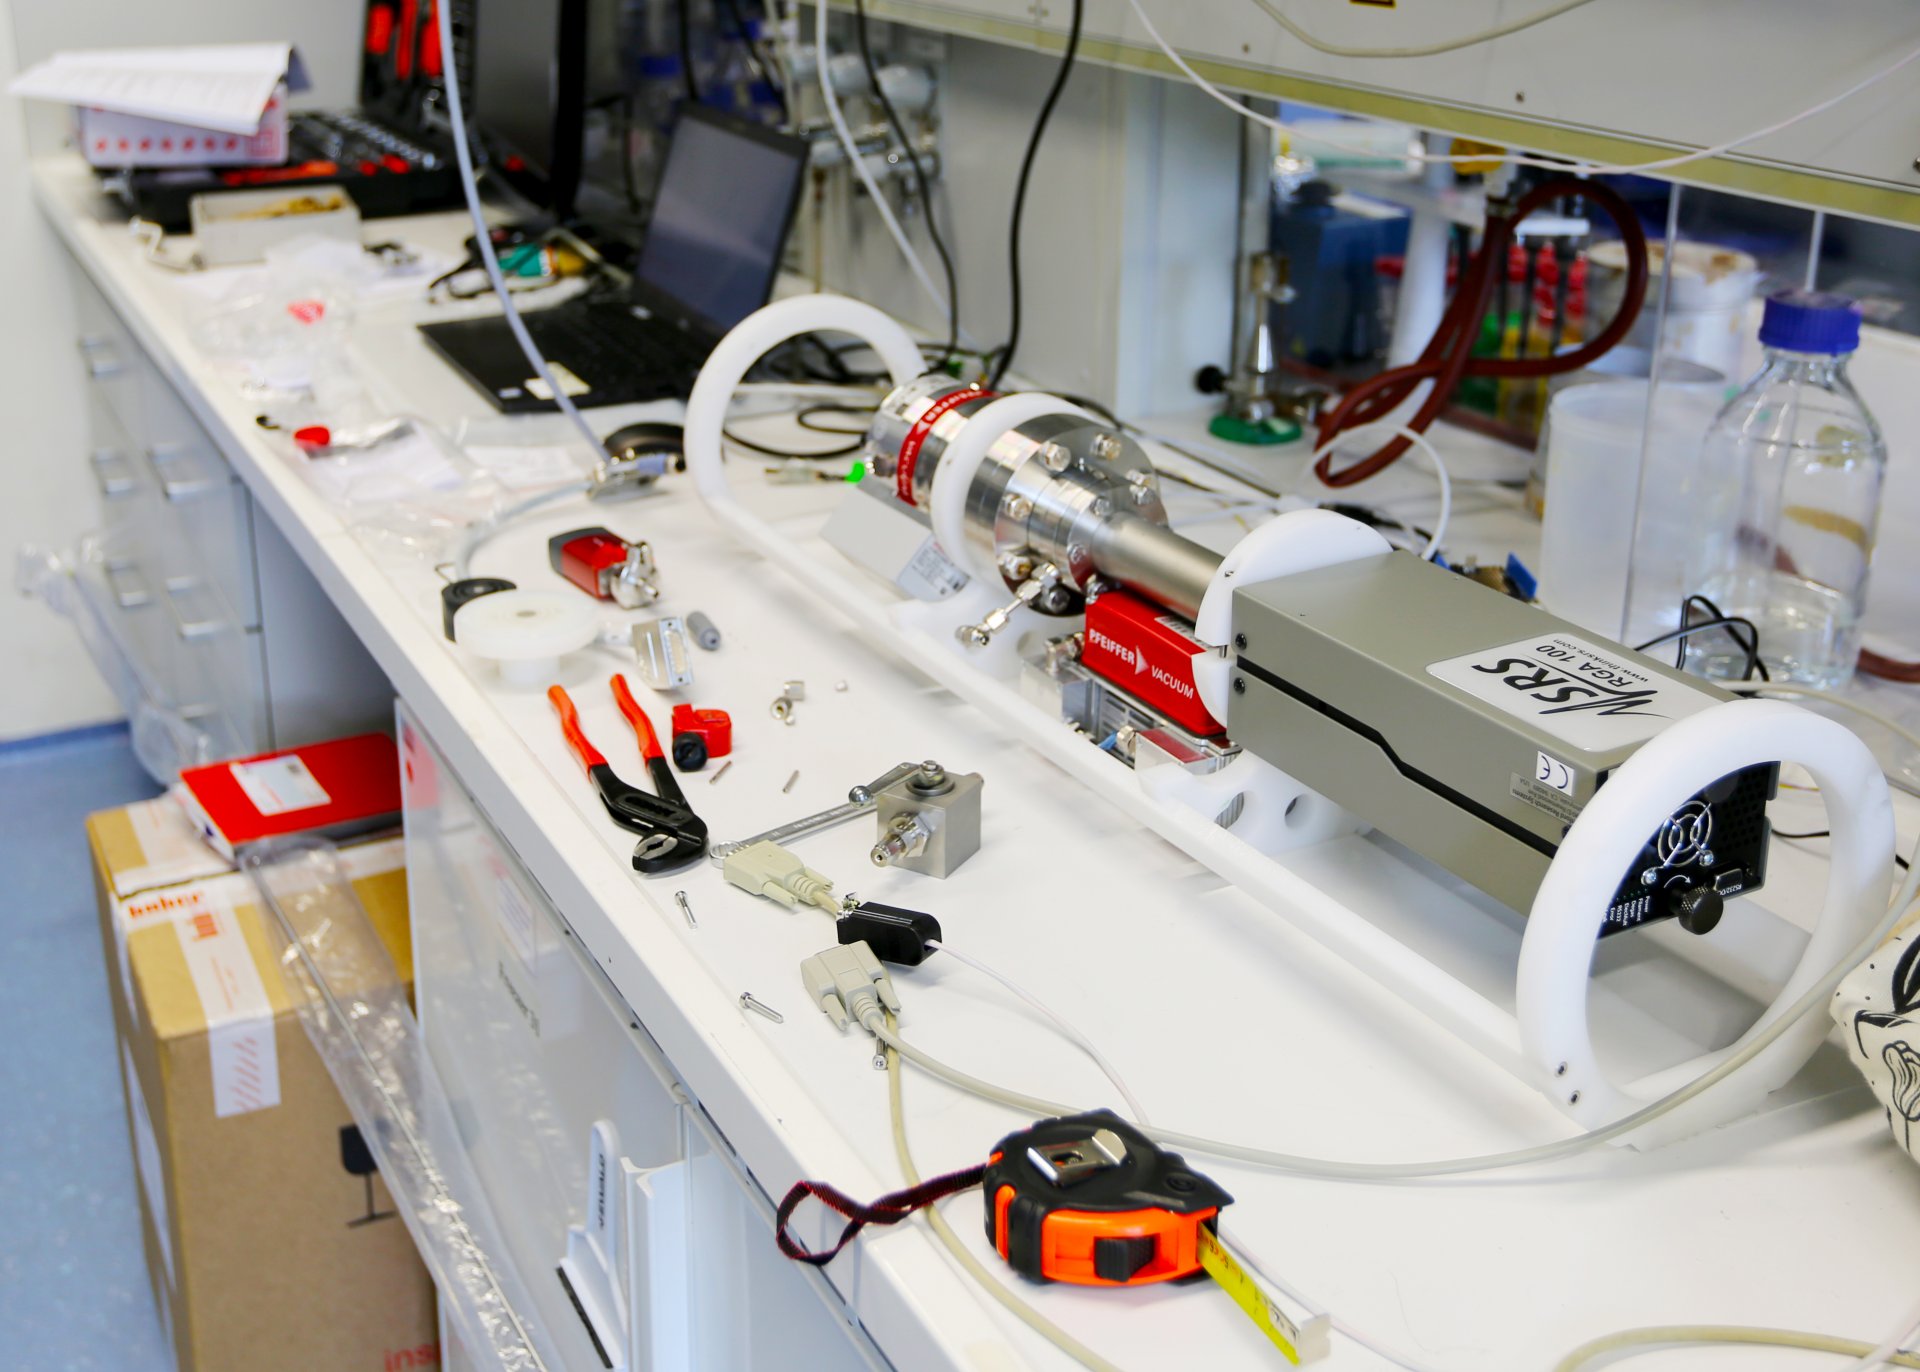 The in situ mass spectrometer is slowly taking shape. (©Max Planck Institute for Marine Microbiology, F. Aspetsberger)